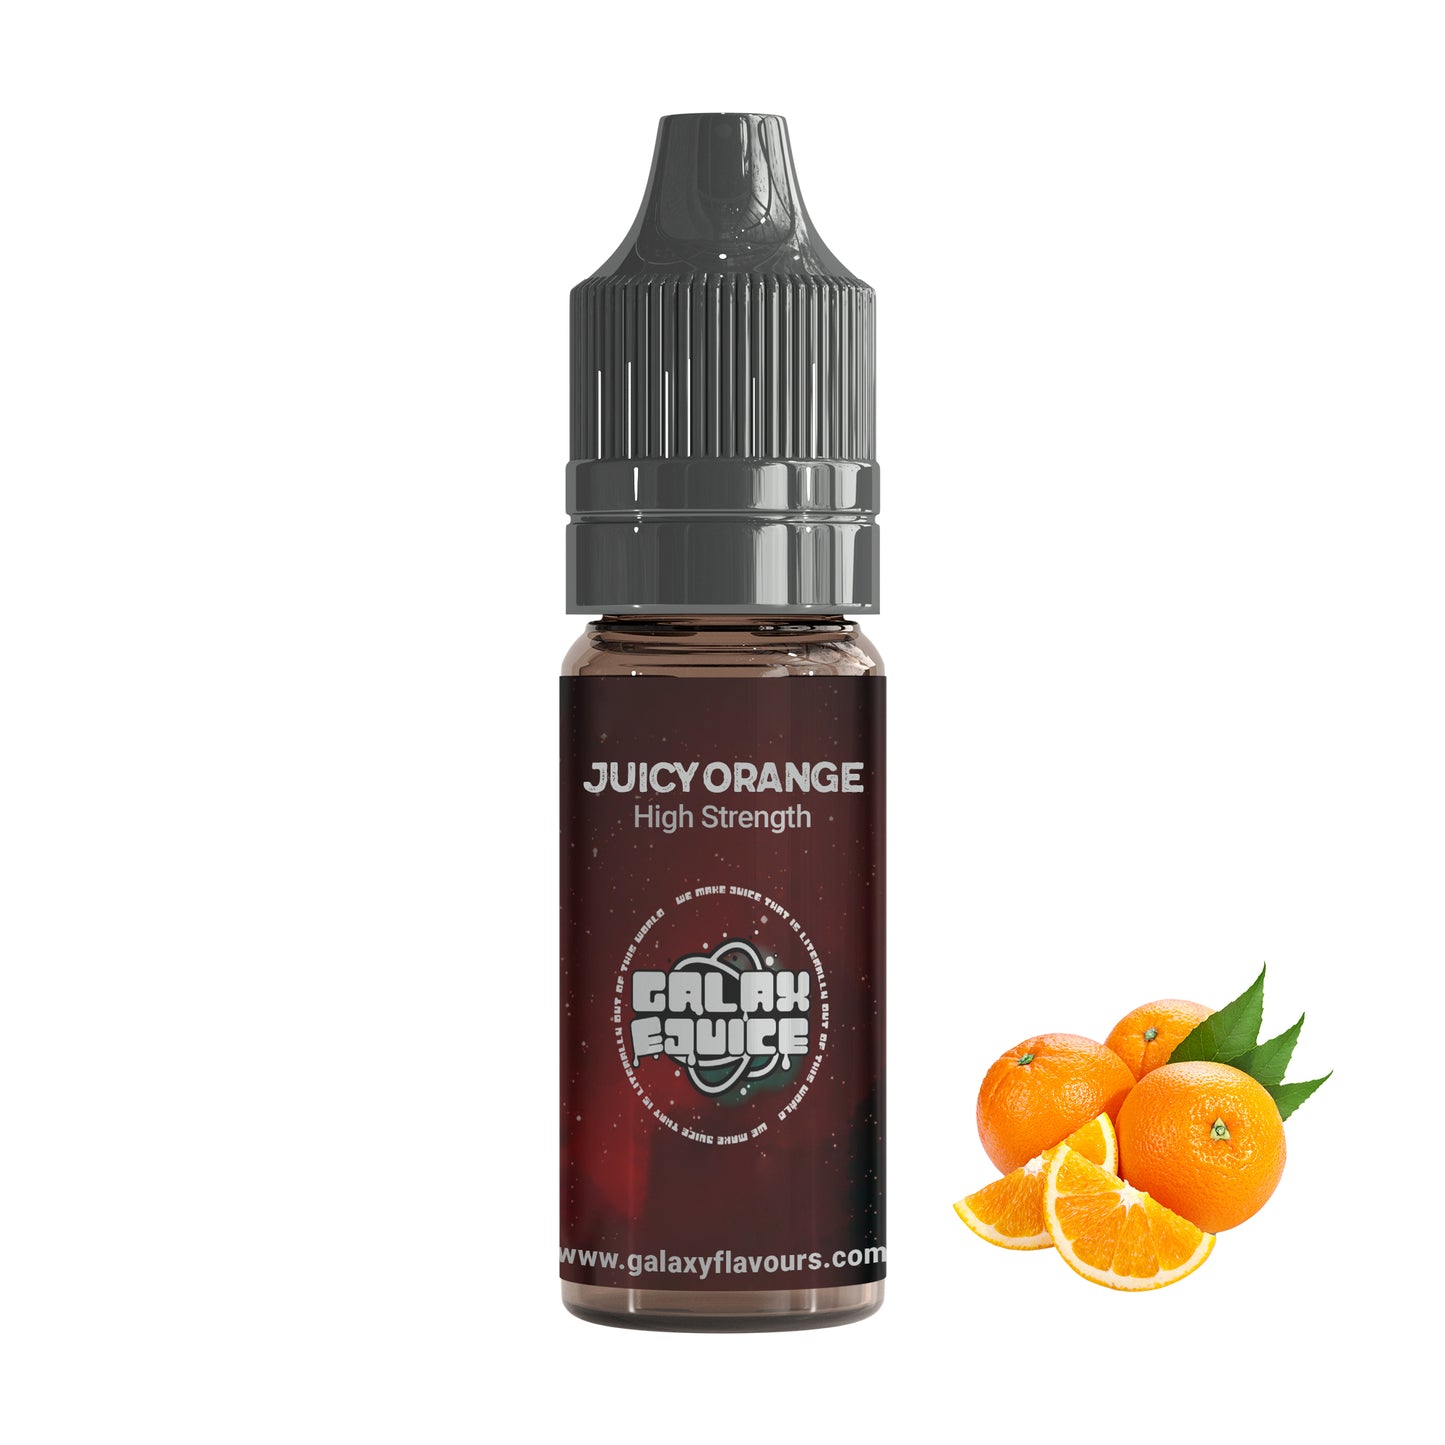 Juicy Orange High Strength Professional Flavouring.